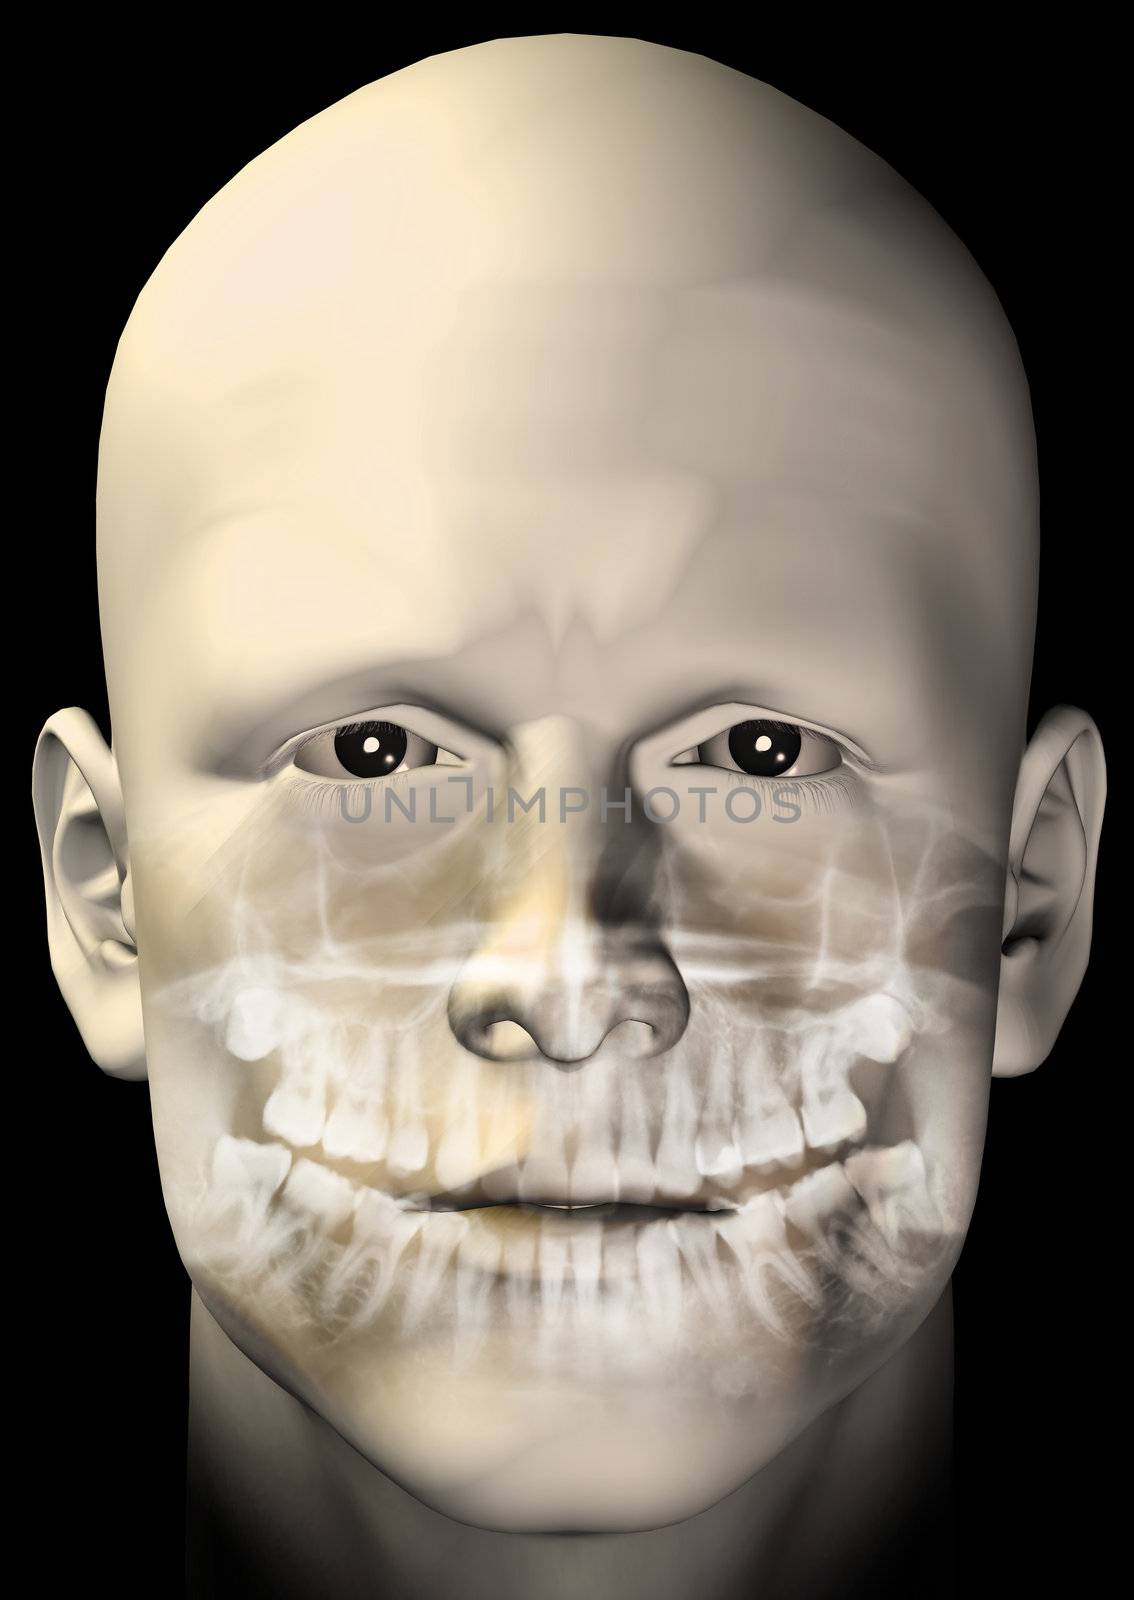 Male figure portrait with dental scan x-ray. 3d computer generated illustration.